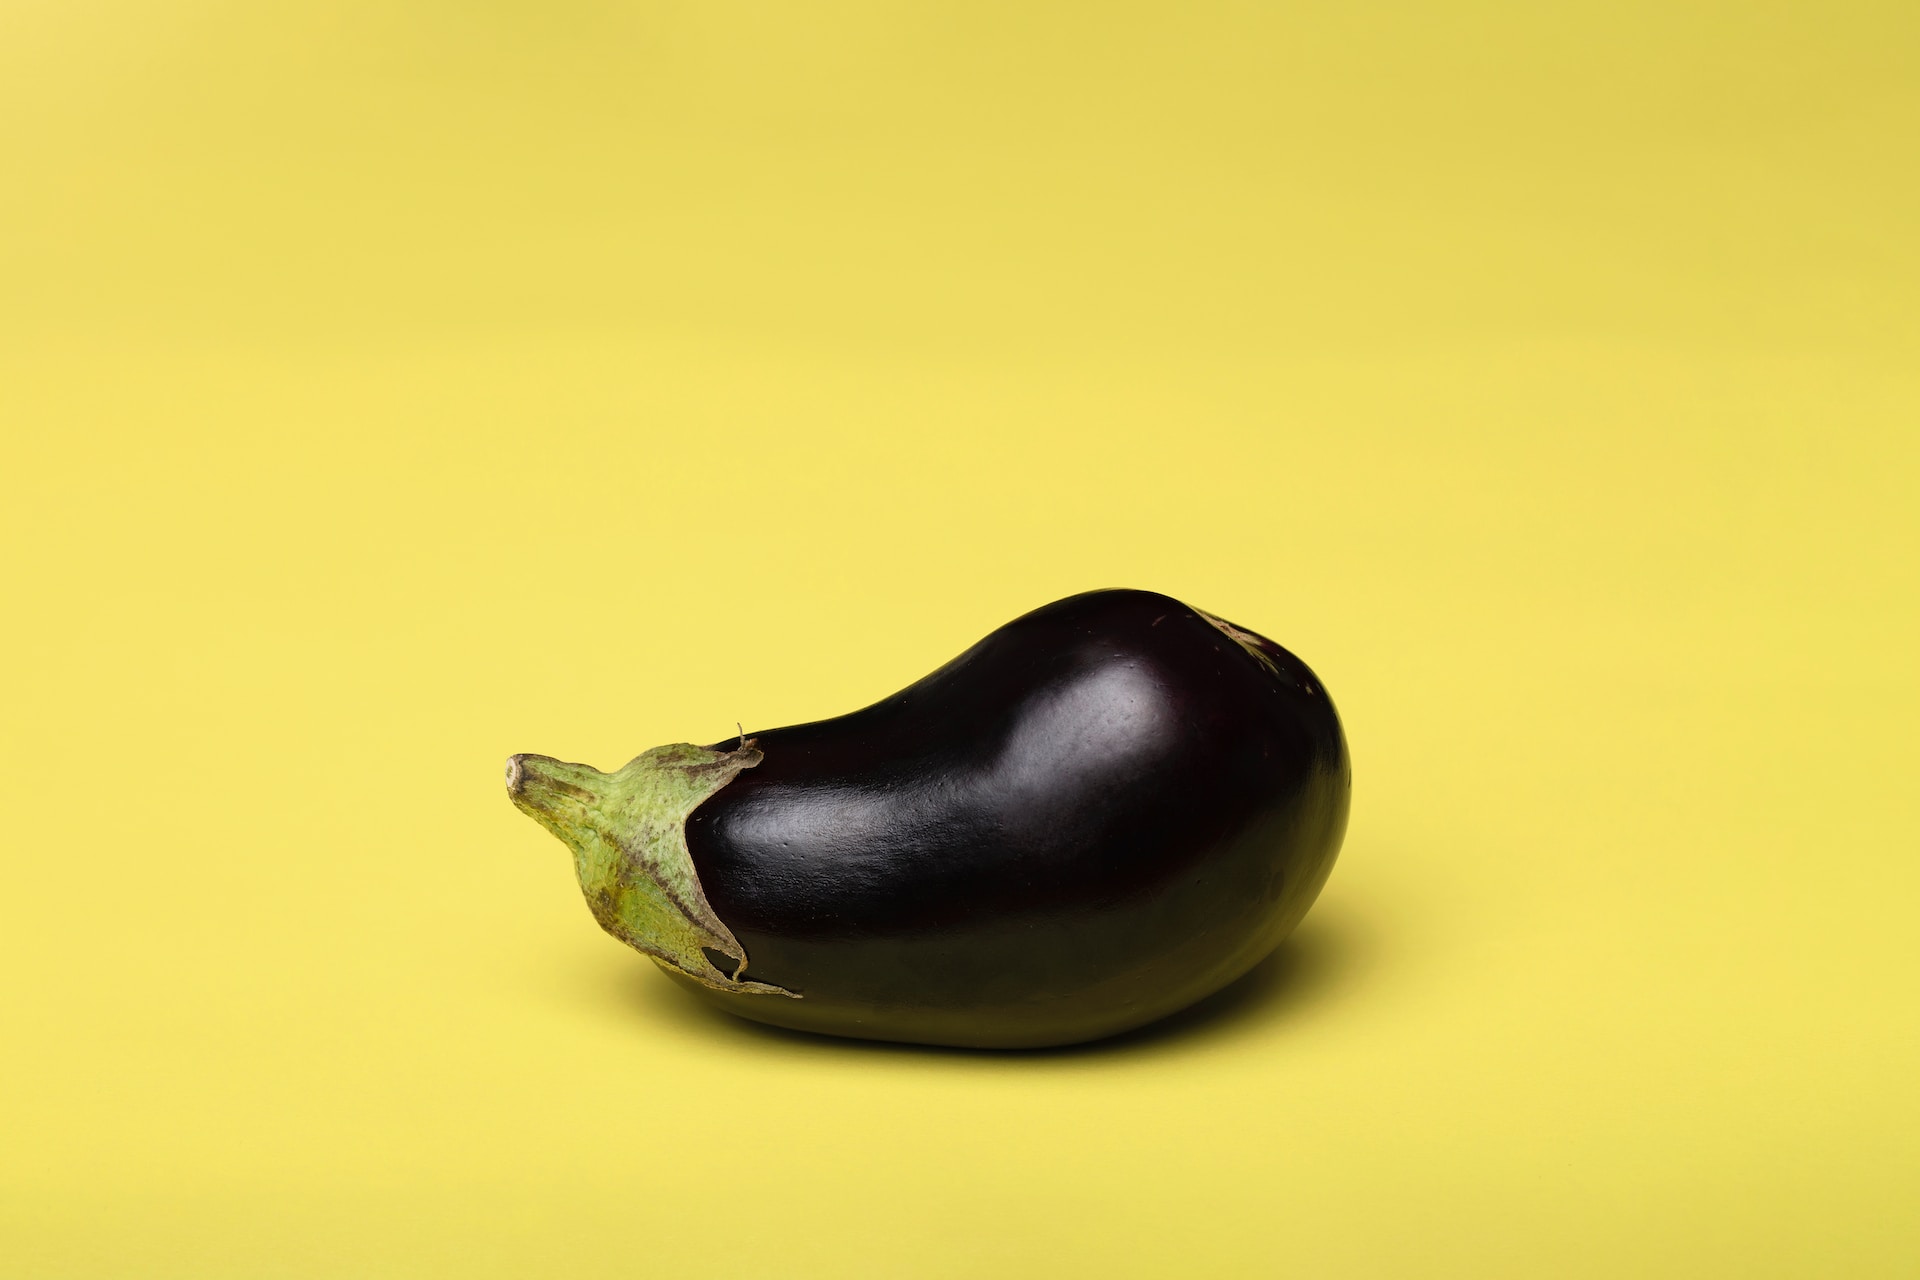 19 Facts About Eggplant - Facts.net